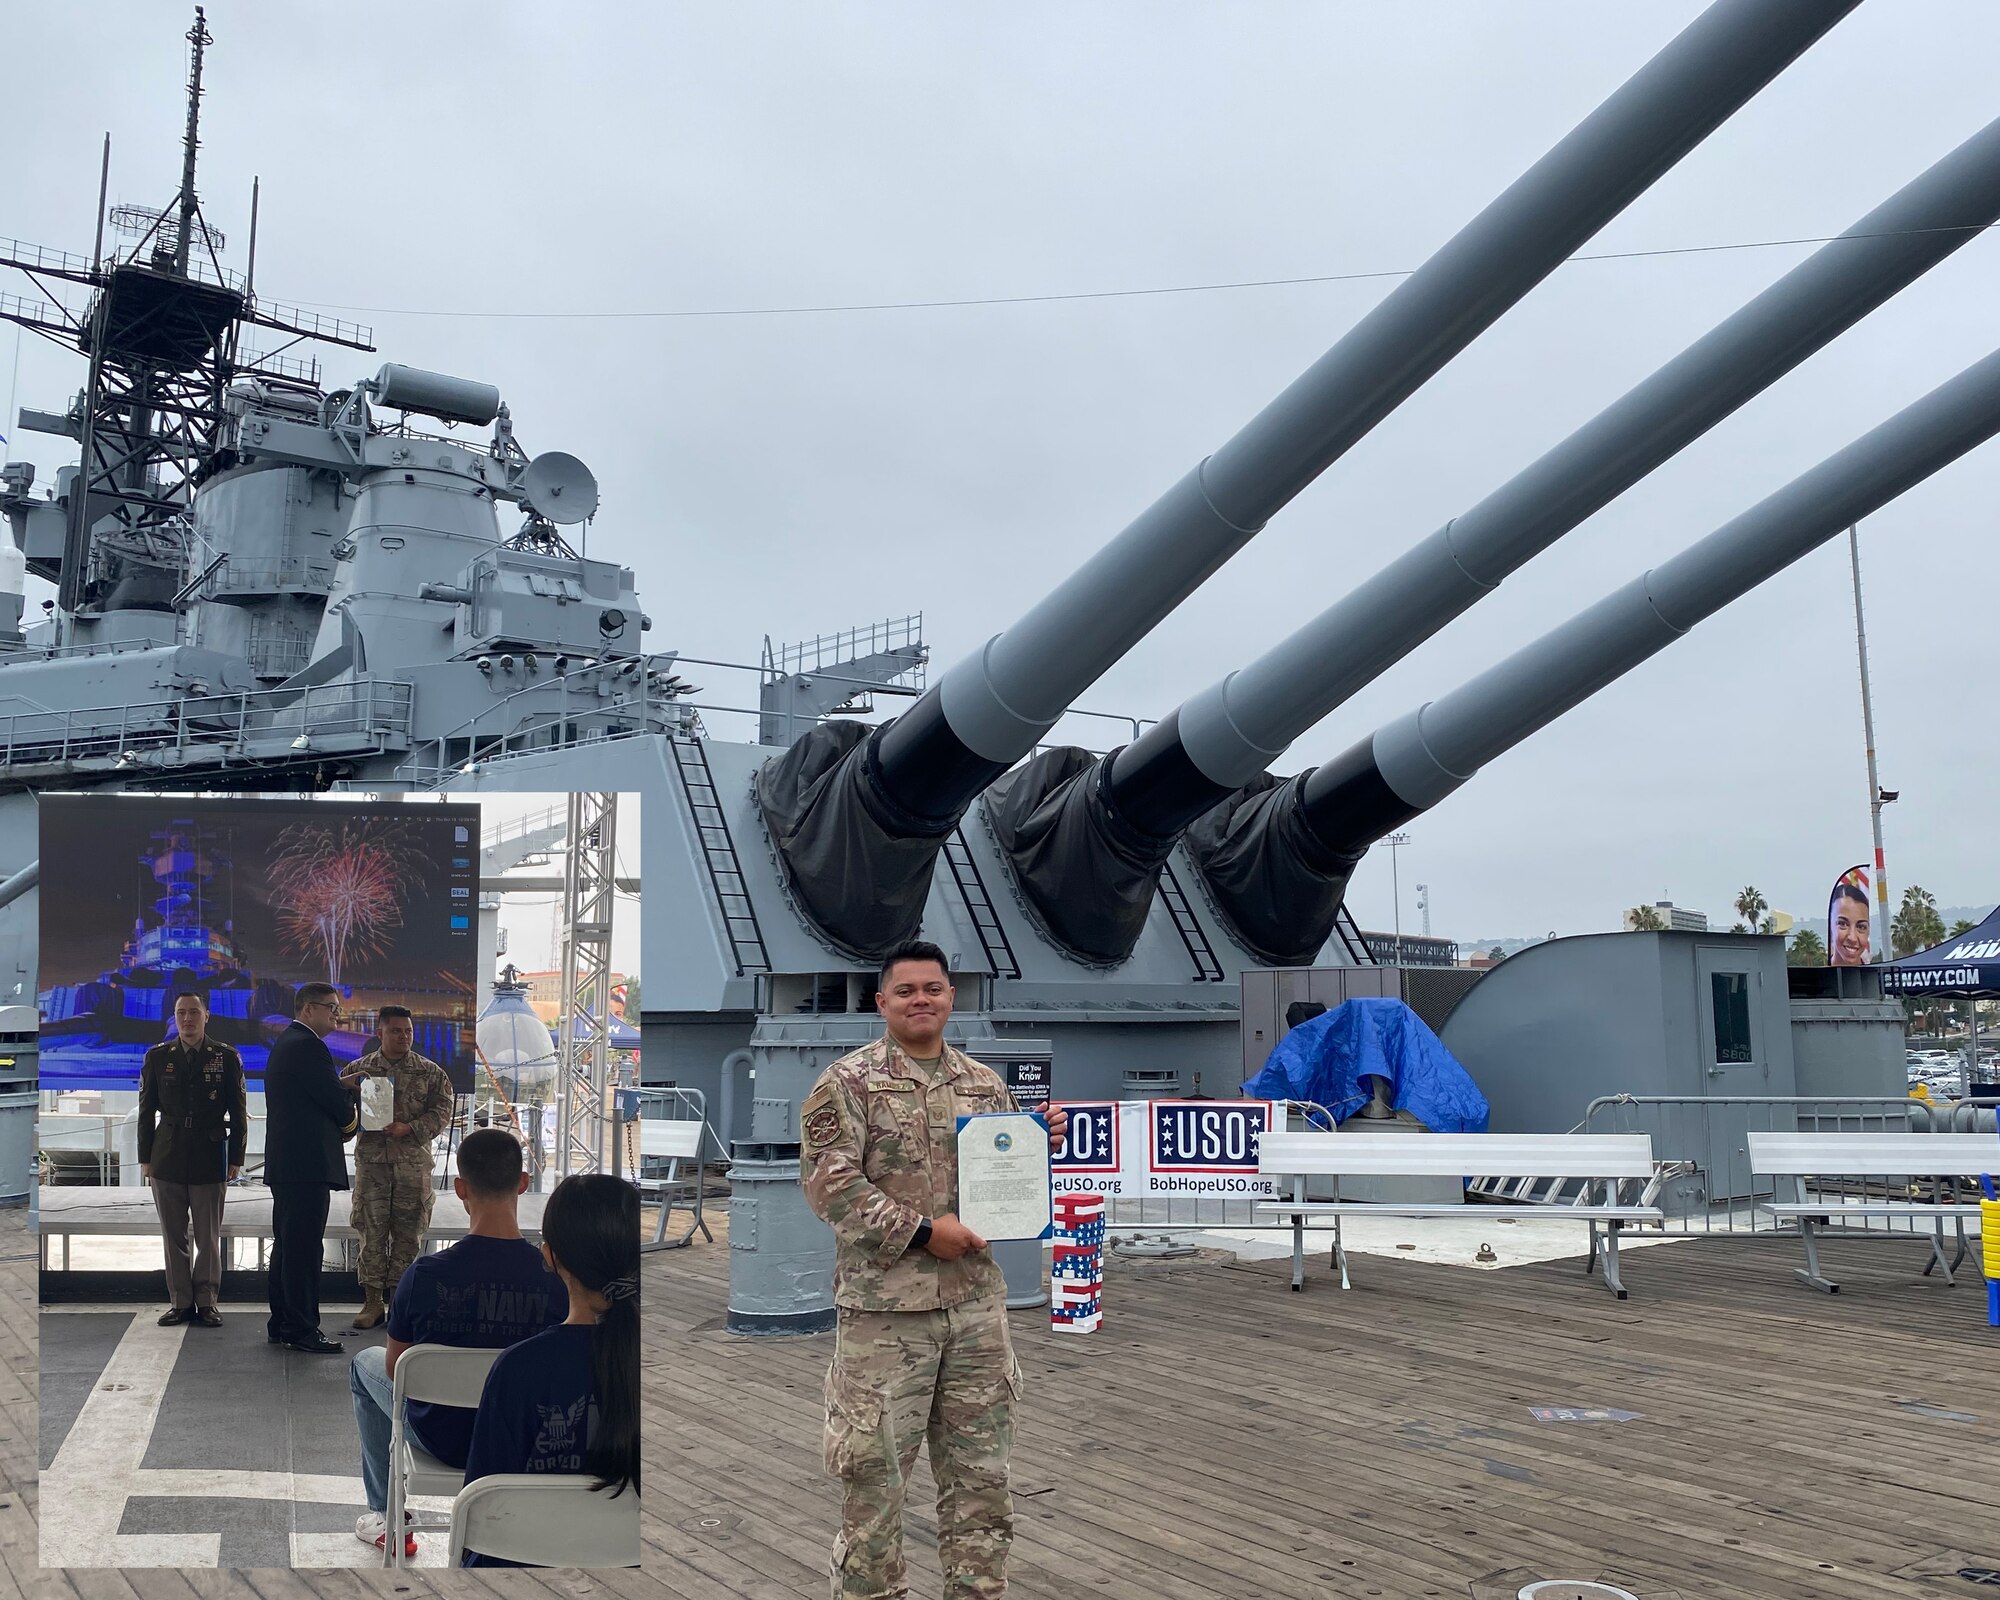 Air Force recruiter shows his Navy award while aboard USS Iowa